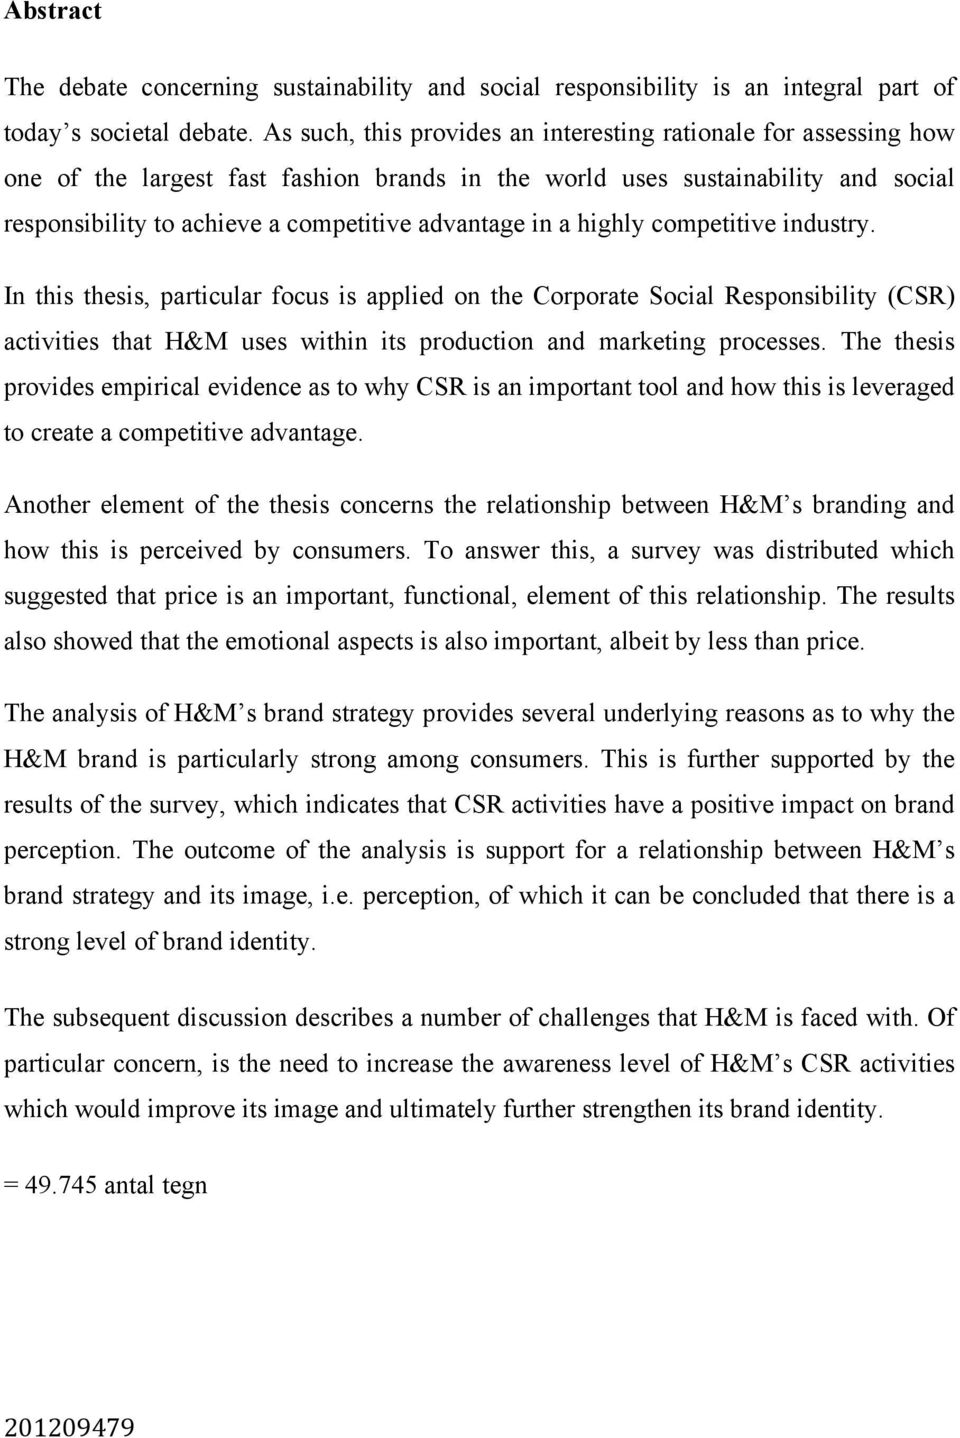 in a highly competitive industry. In this thesis, particular focus is applied on the Corporate Social Responsibility (CSR) activities that H&M uses within its production and marketing processes.